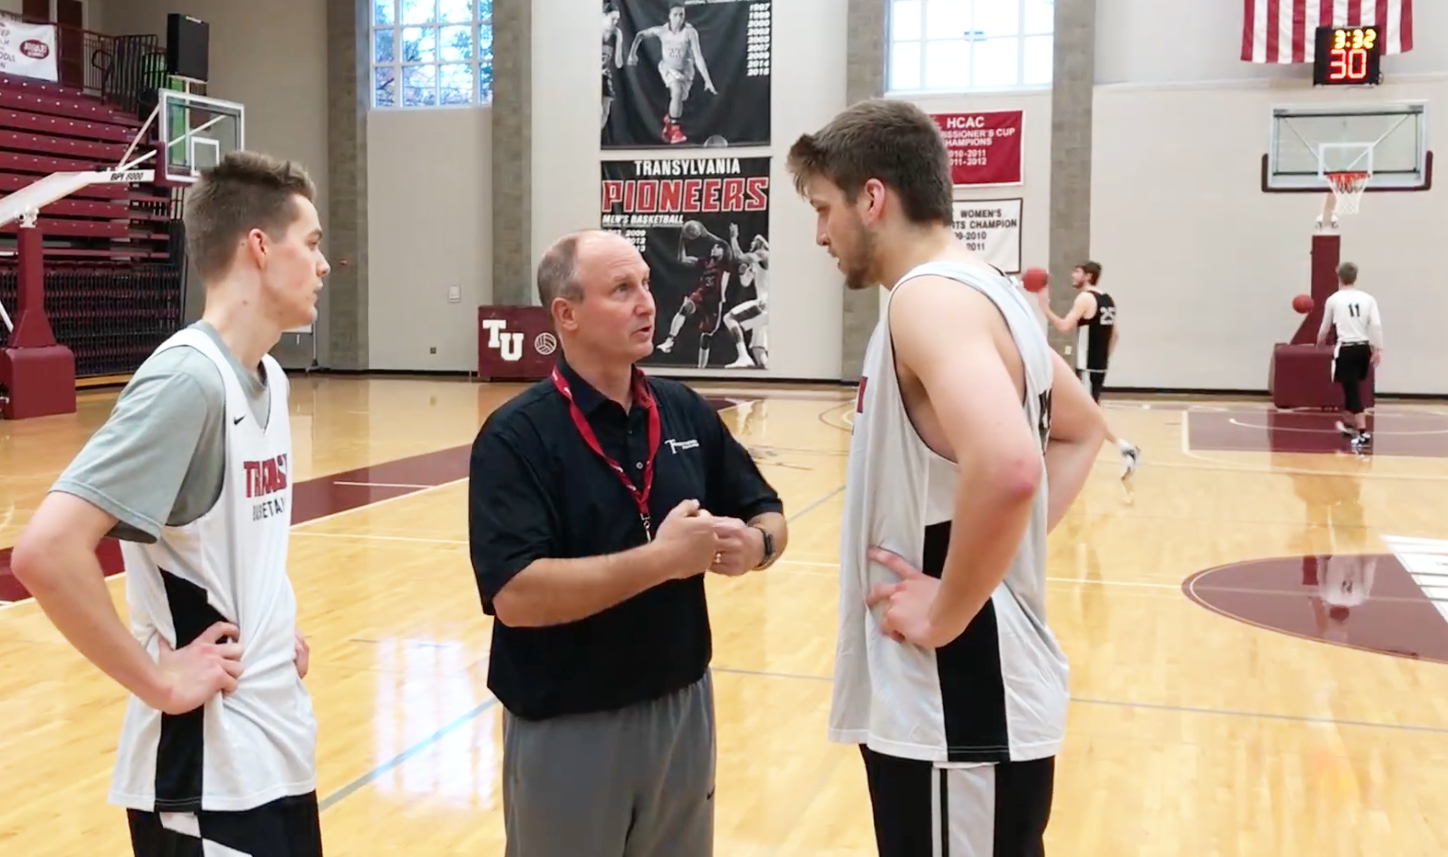 Pioneers from Down Under offer their take on Transy